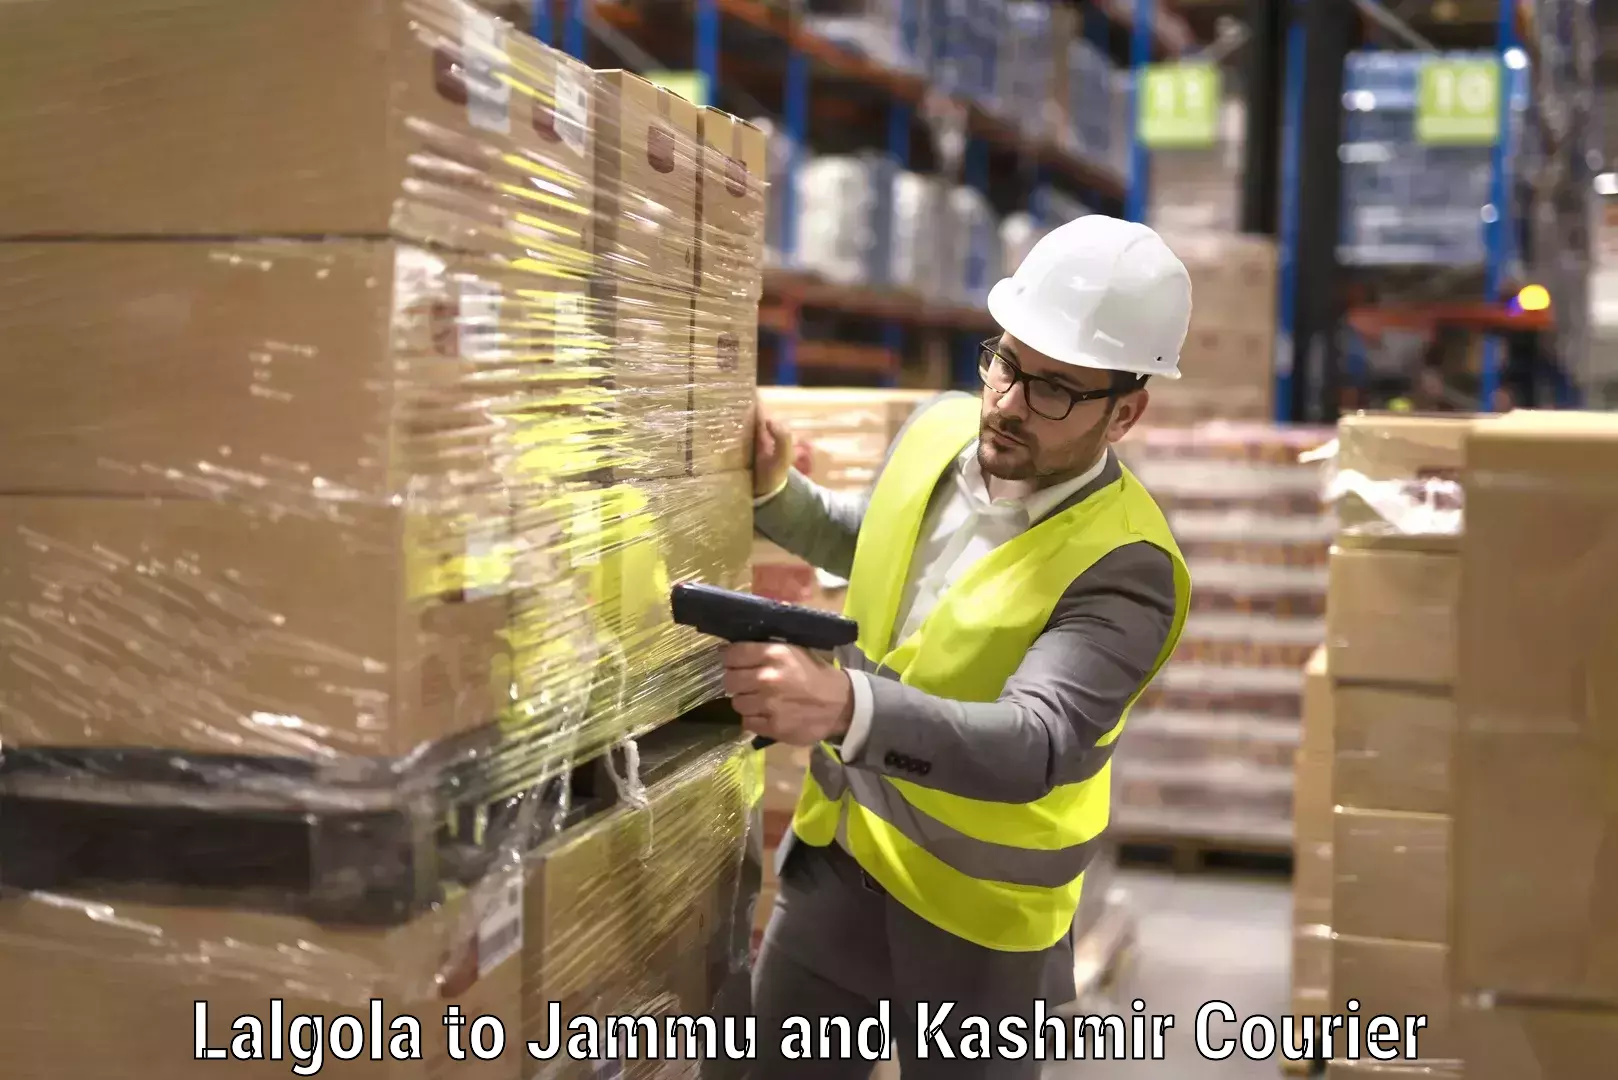 Efficient moving company Lalgola to Jammu and Kashmir